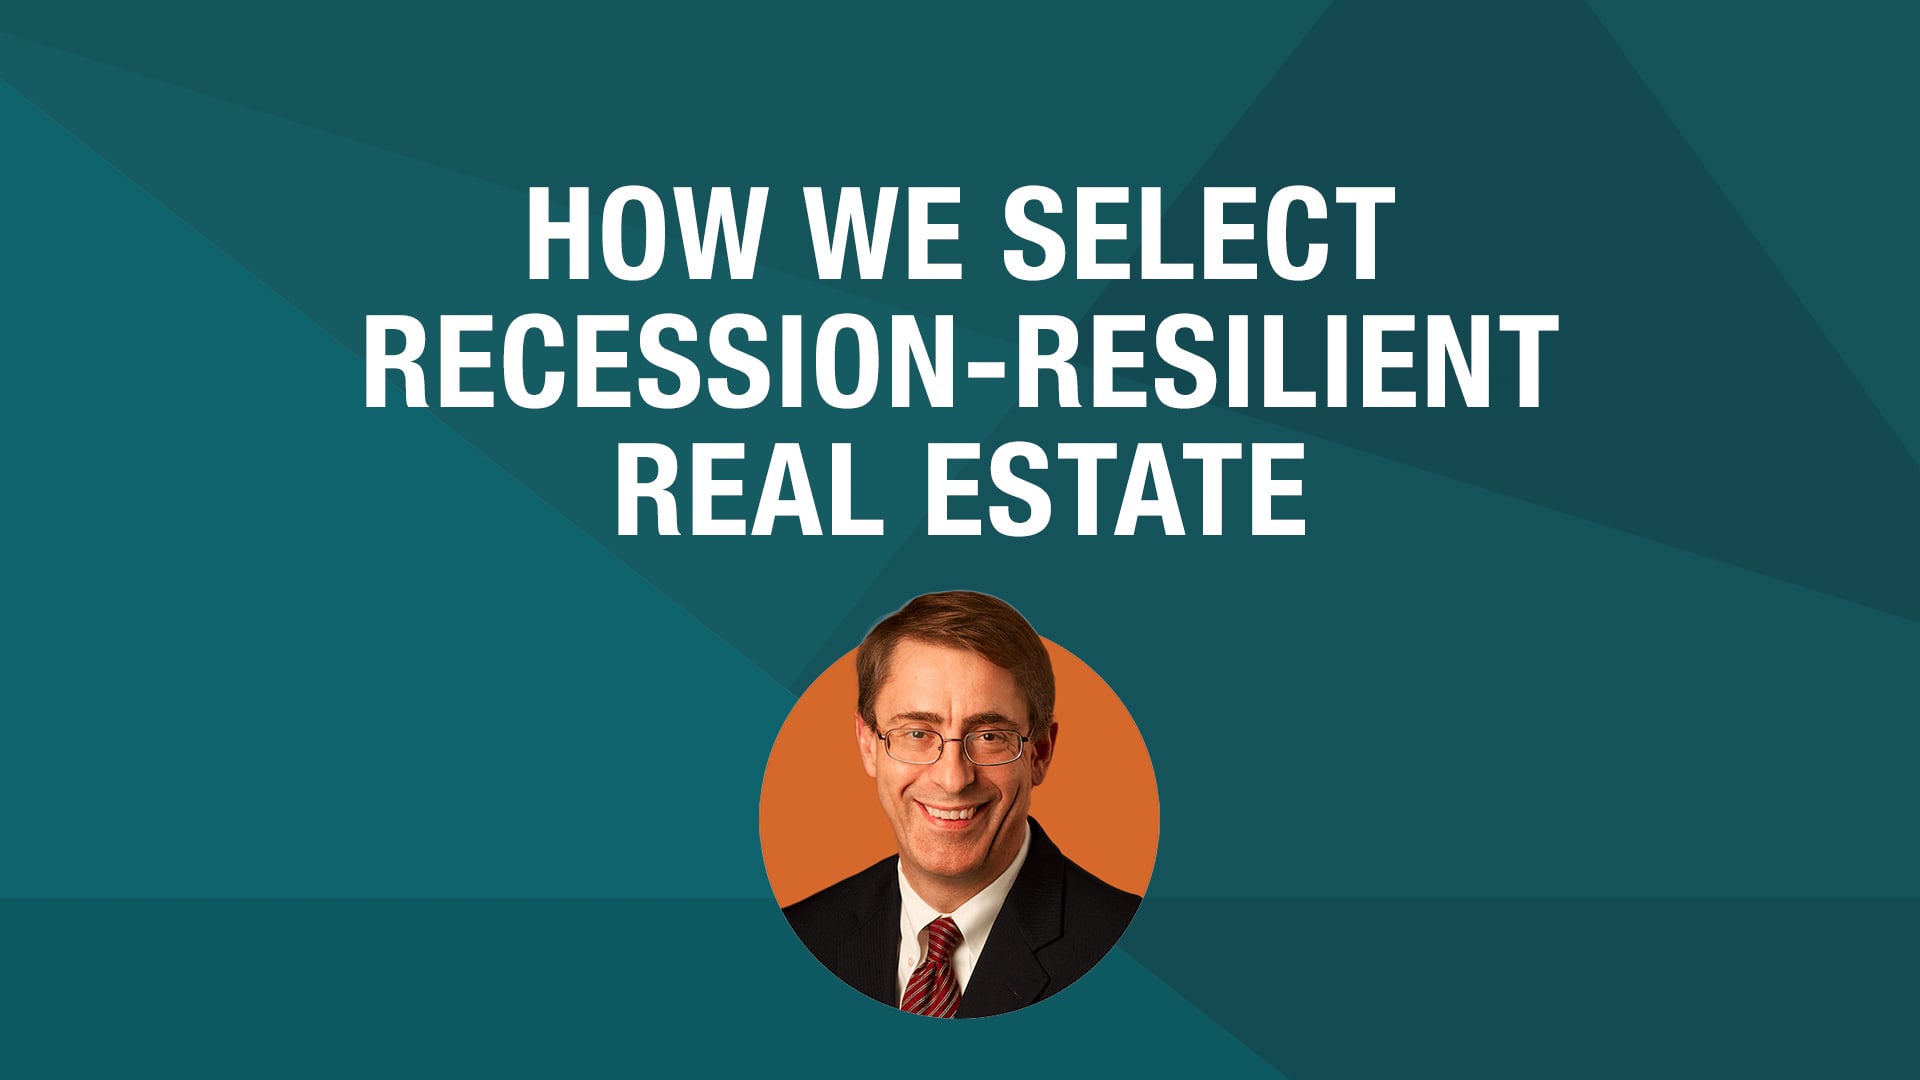 How We Select Recession-Resilient Real Estate